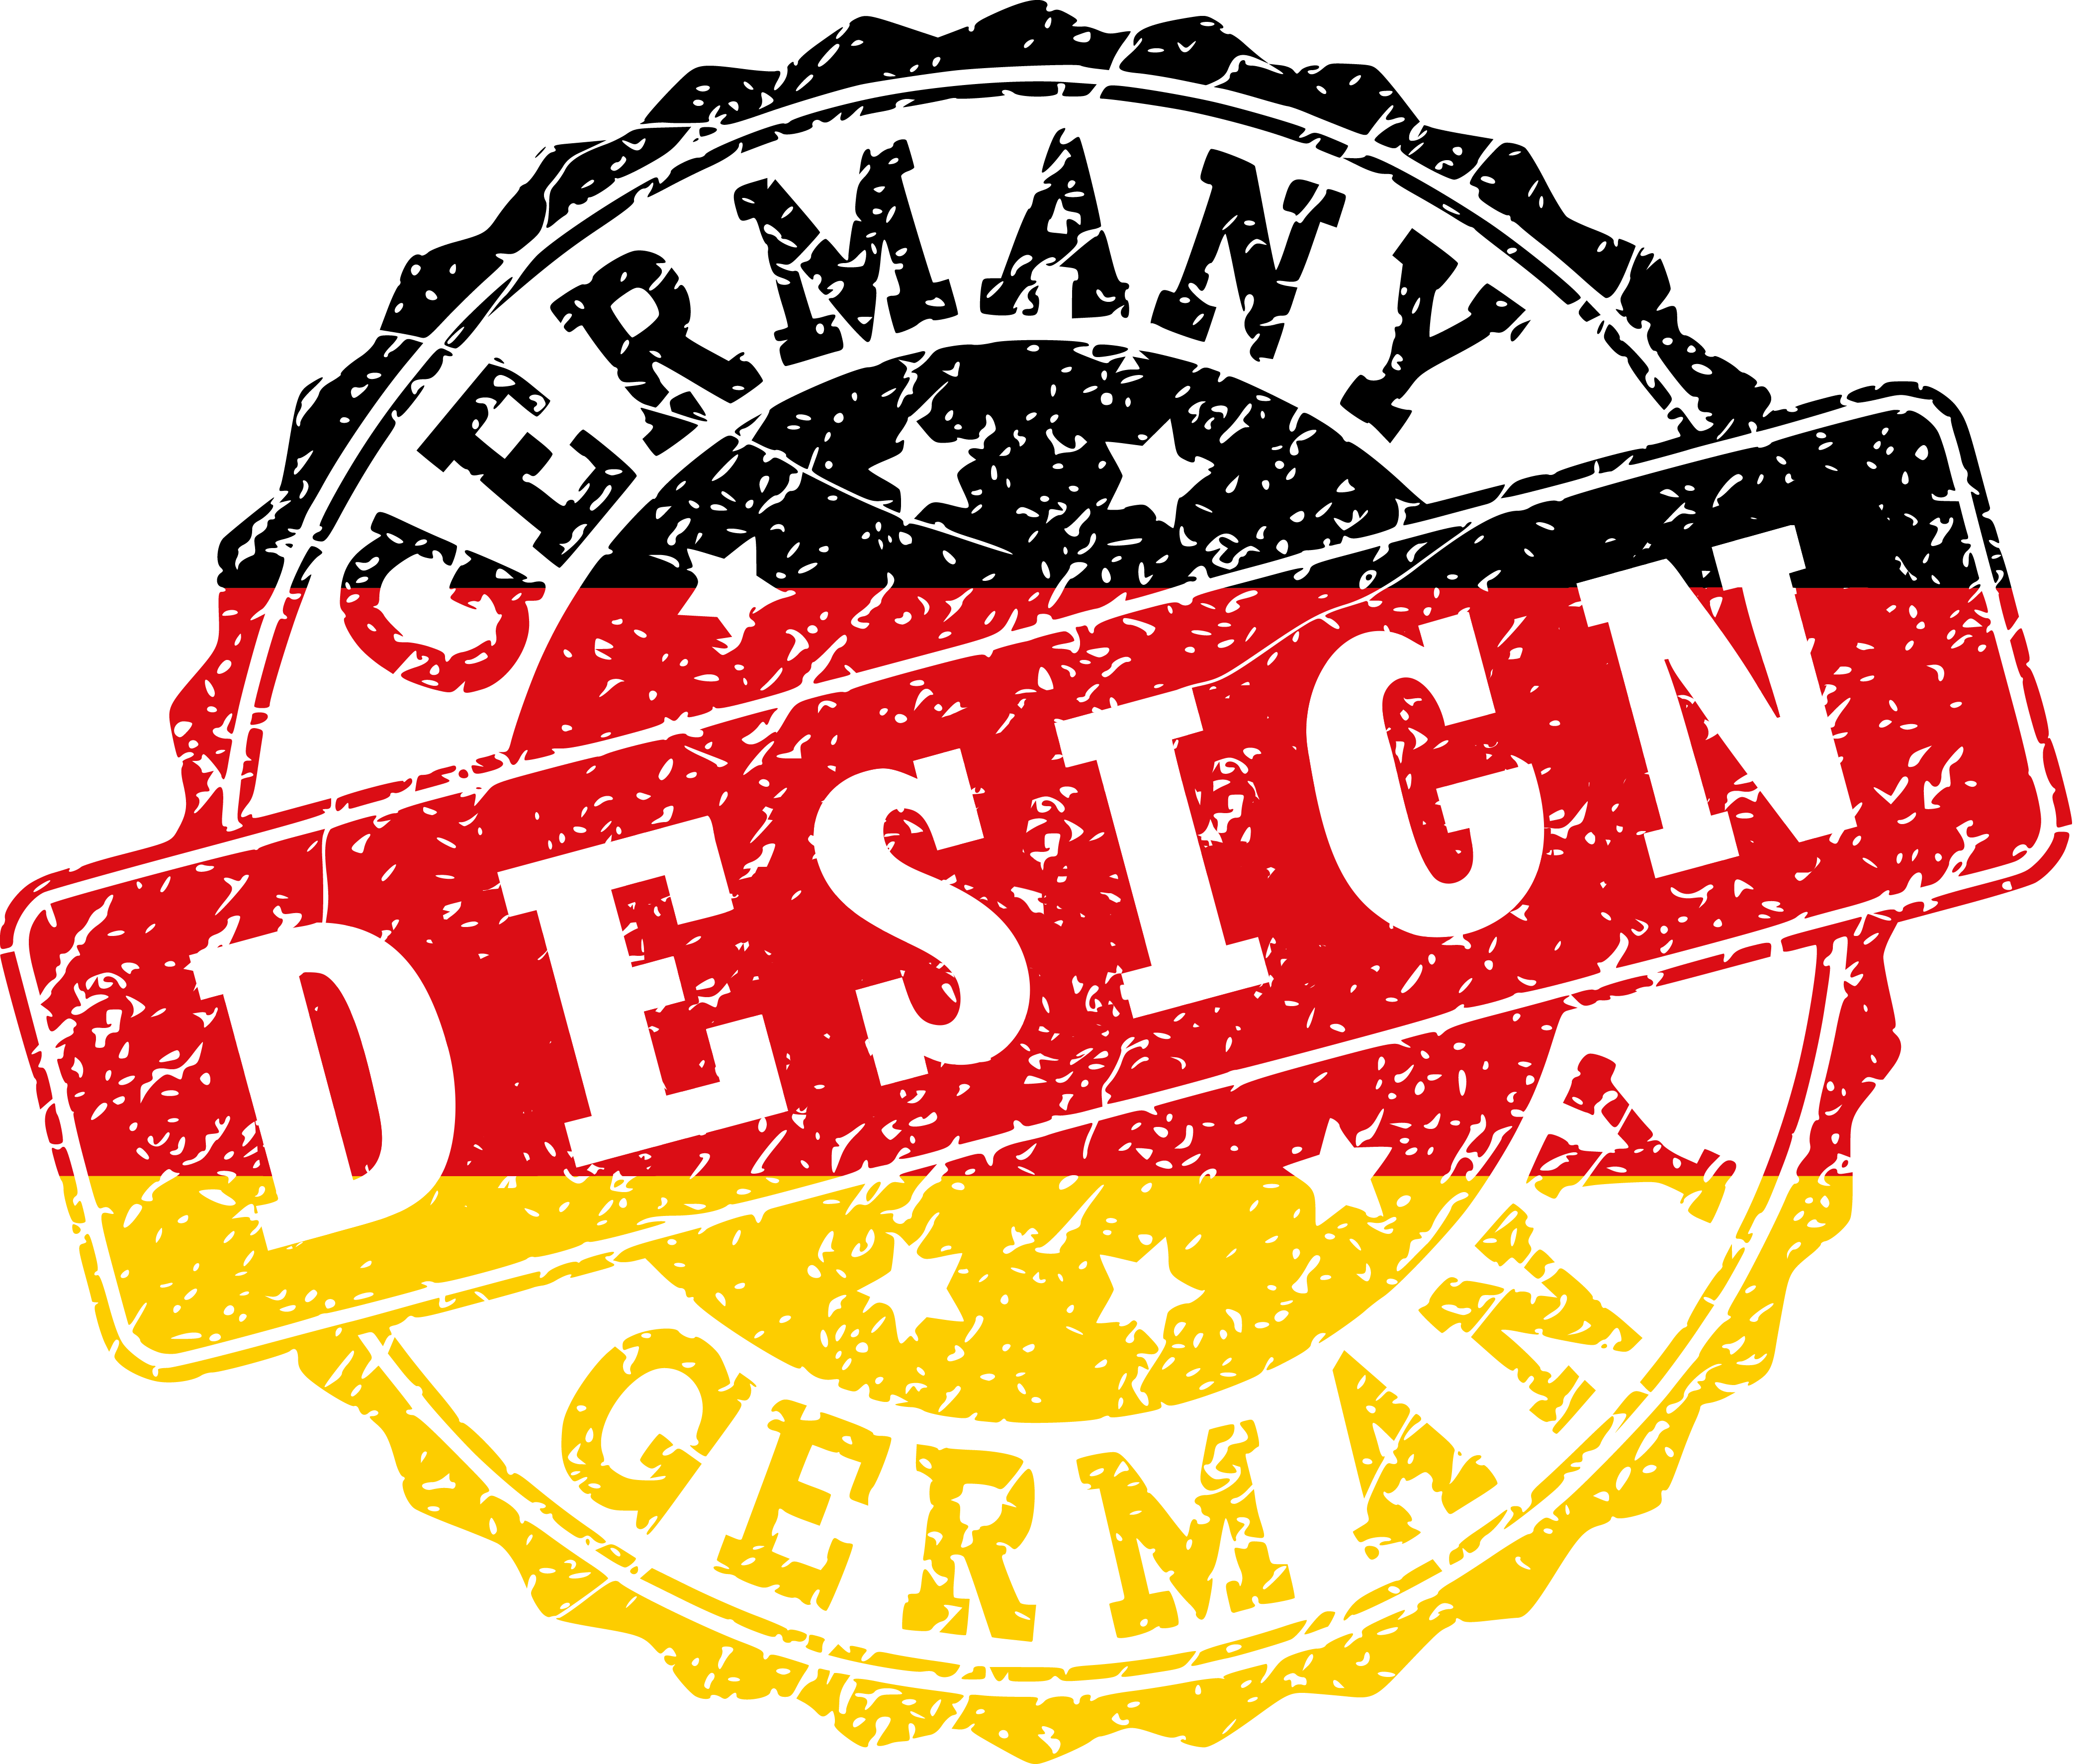 Design Made In Germany